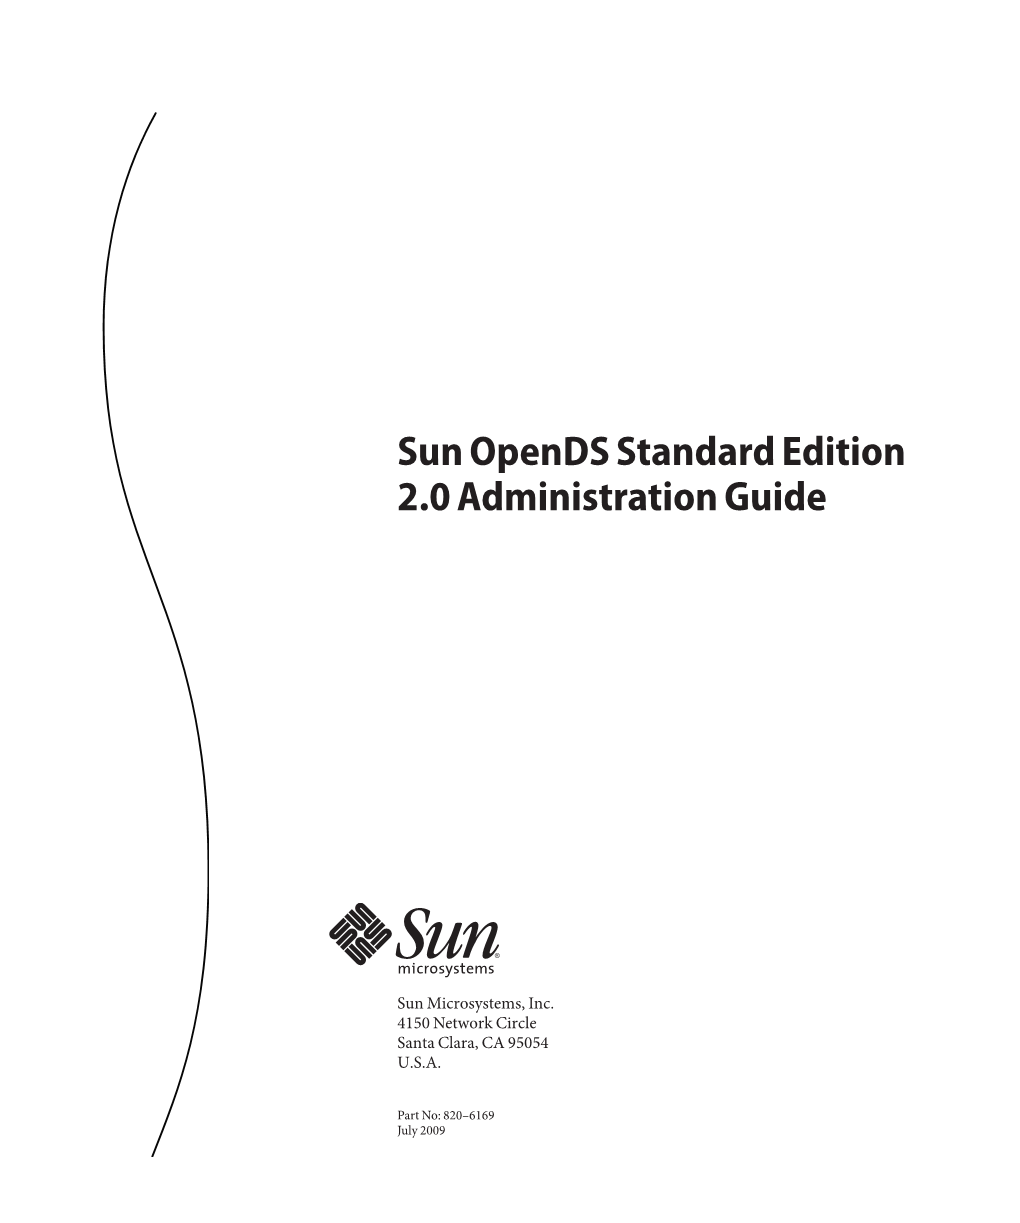 Sun Opends Standard Edition 2.0 Administration Guide